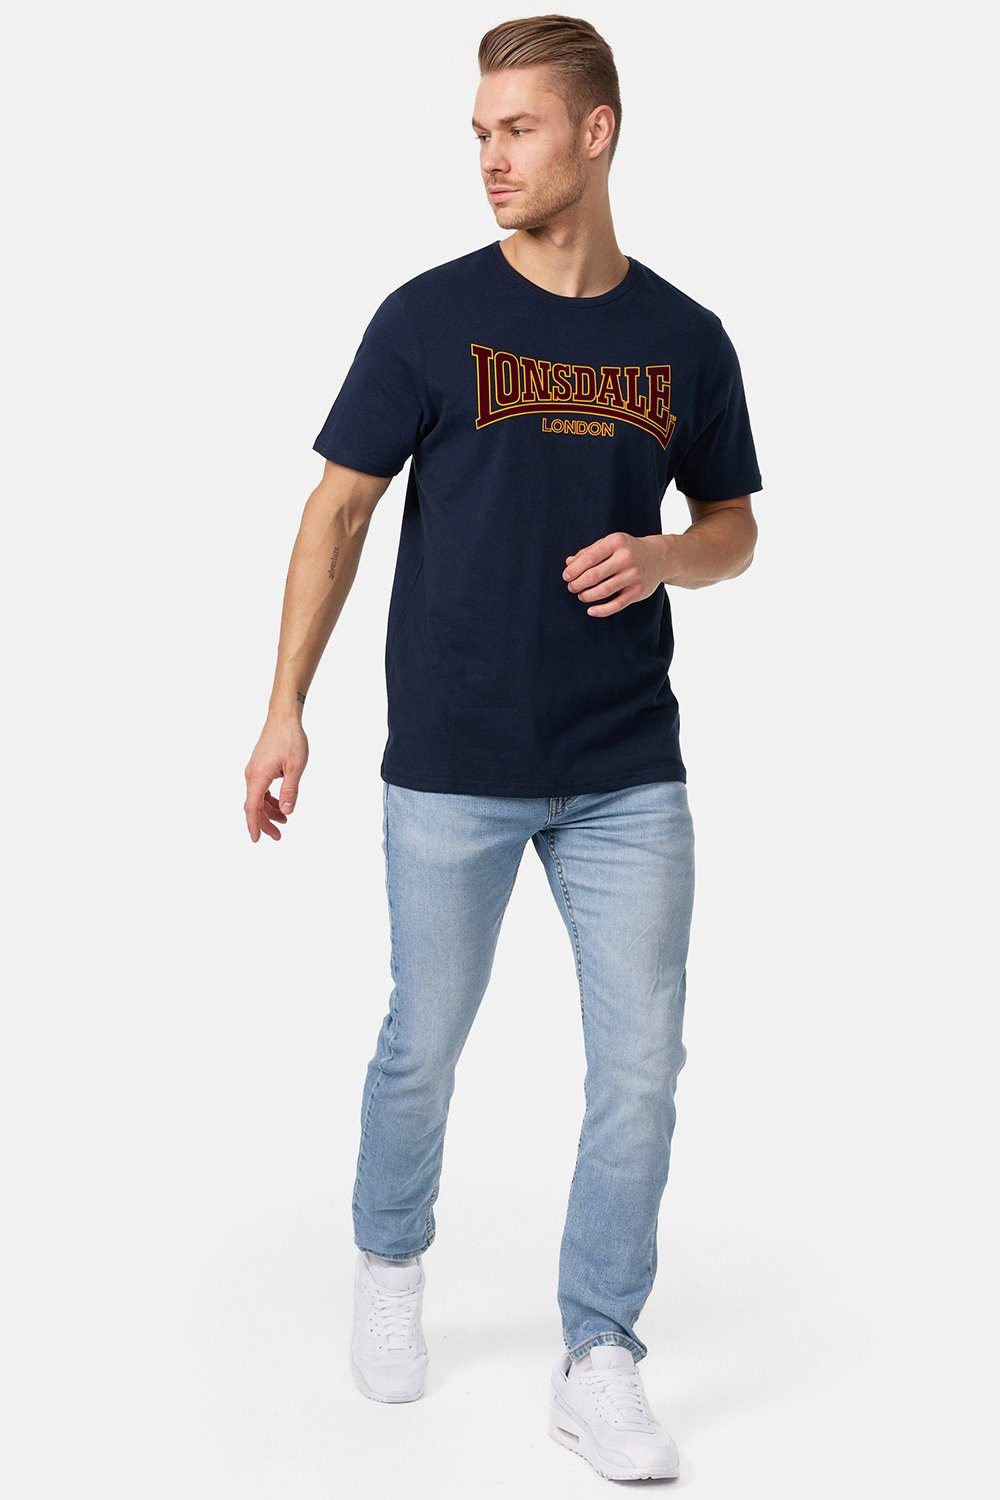 CLASSIC Navy Lonsdale T-Shirt